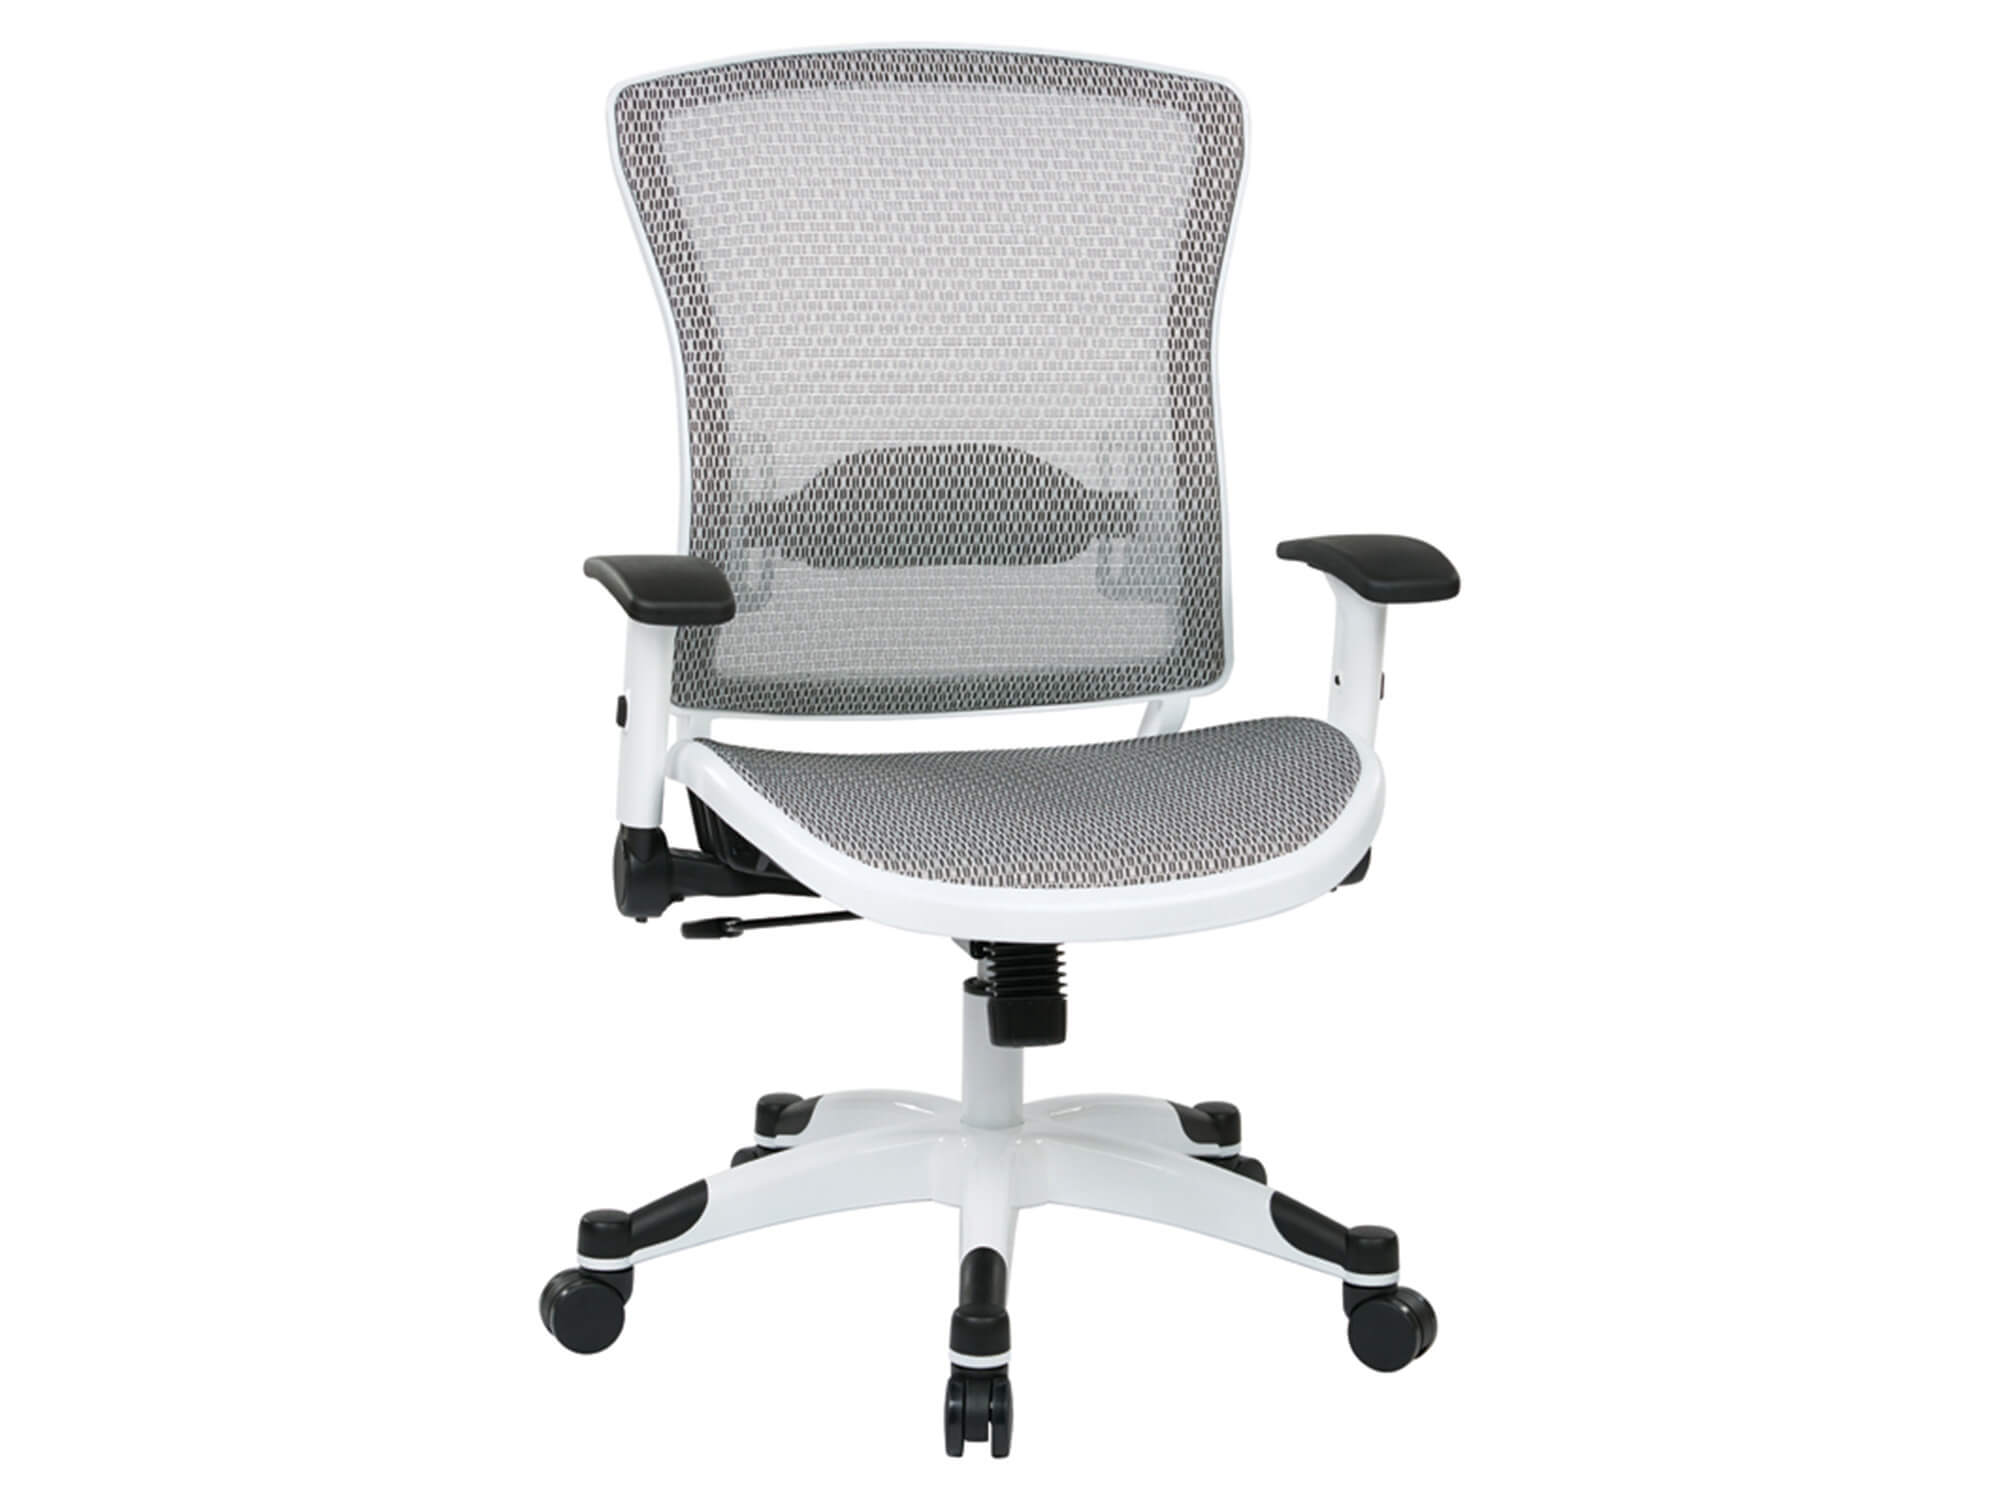 Chairs for office ergonomic chair